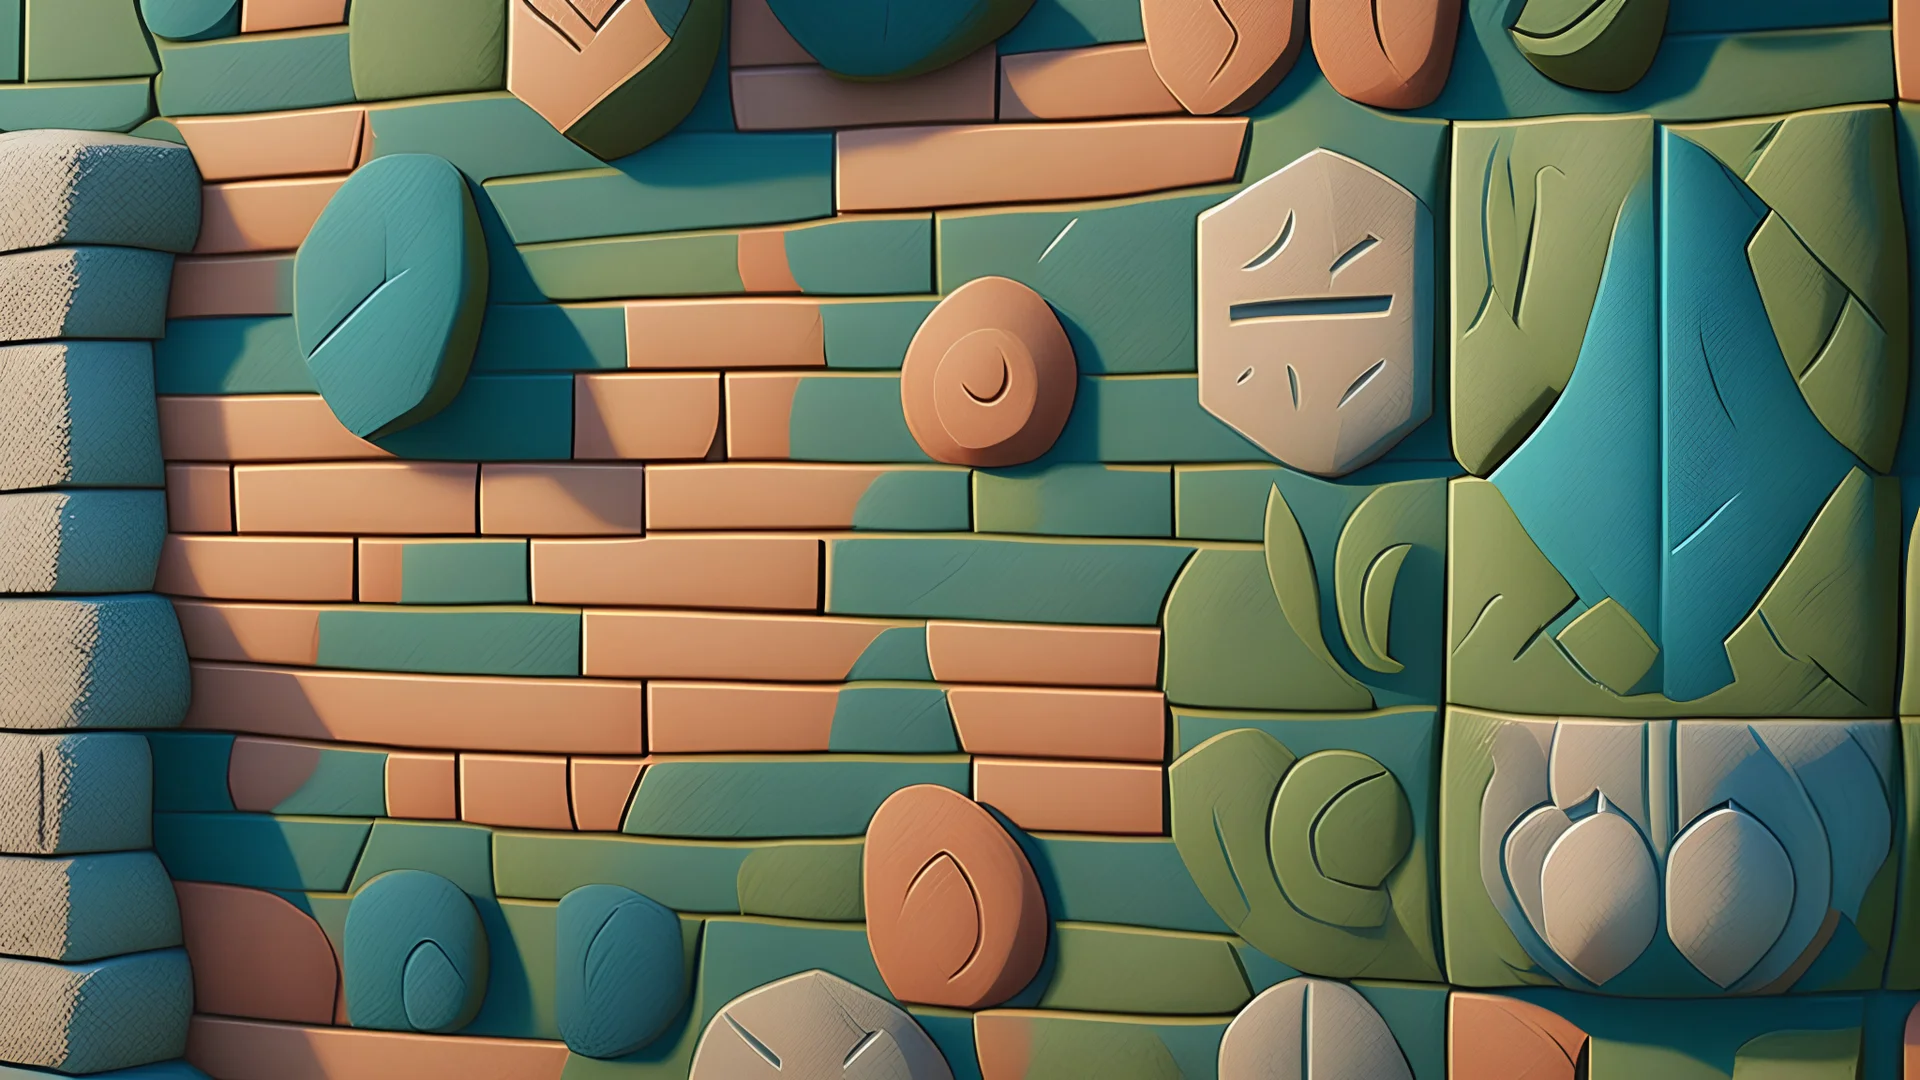 Wall texture inspired by Ghibli's visual style, with designs and colors that evoke his most iconic films, such as The Wind Rises or Princess Mononoke. Highly detailed and with different areas of color and patterns, for use in 3D renderings or graphic designs